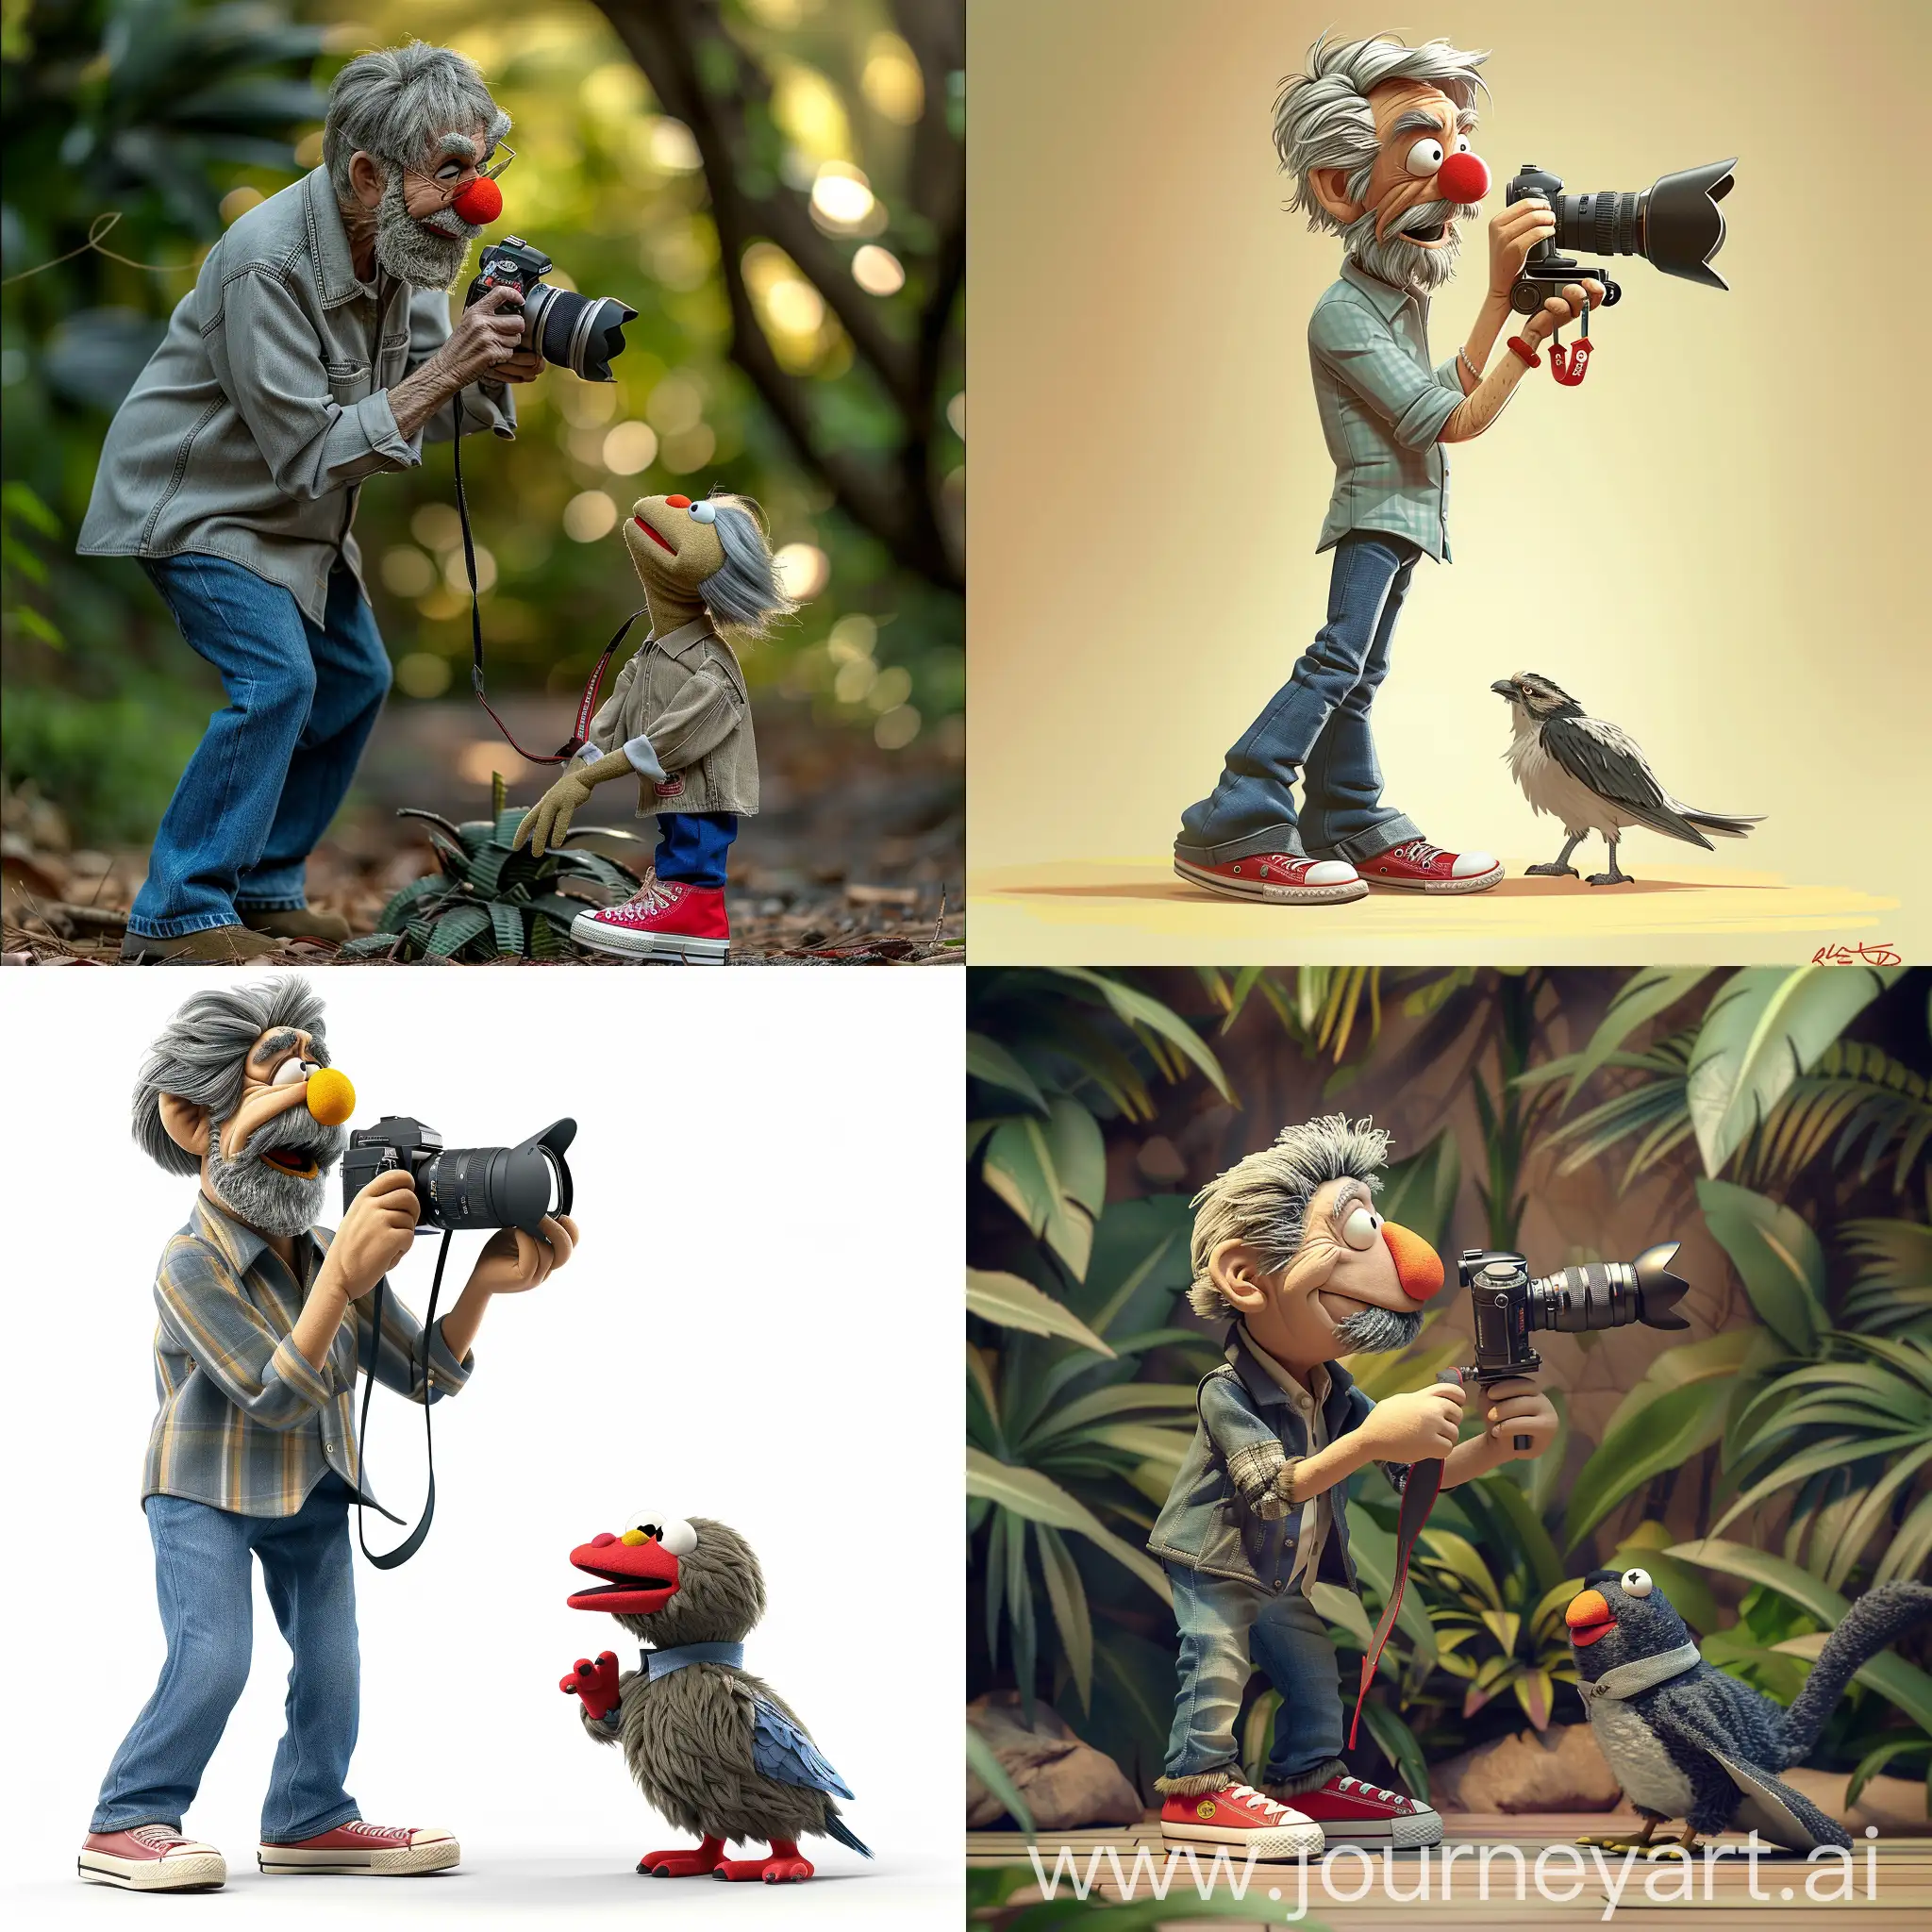 In the style of Jim Henson muppets from Sesame Street; Muppets. An older man, roundish face, grey shortish hair, grey goatee facial hair, collared shirt button down, blue jeans, red converse all stars. He is holding a fancy camera with a long lense taking a picture of a cool bird.